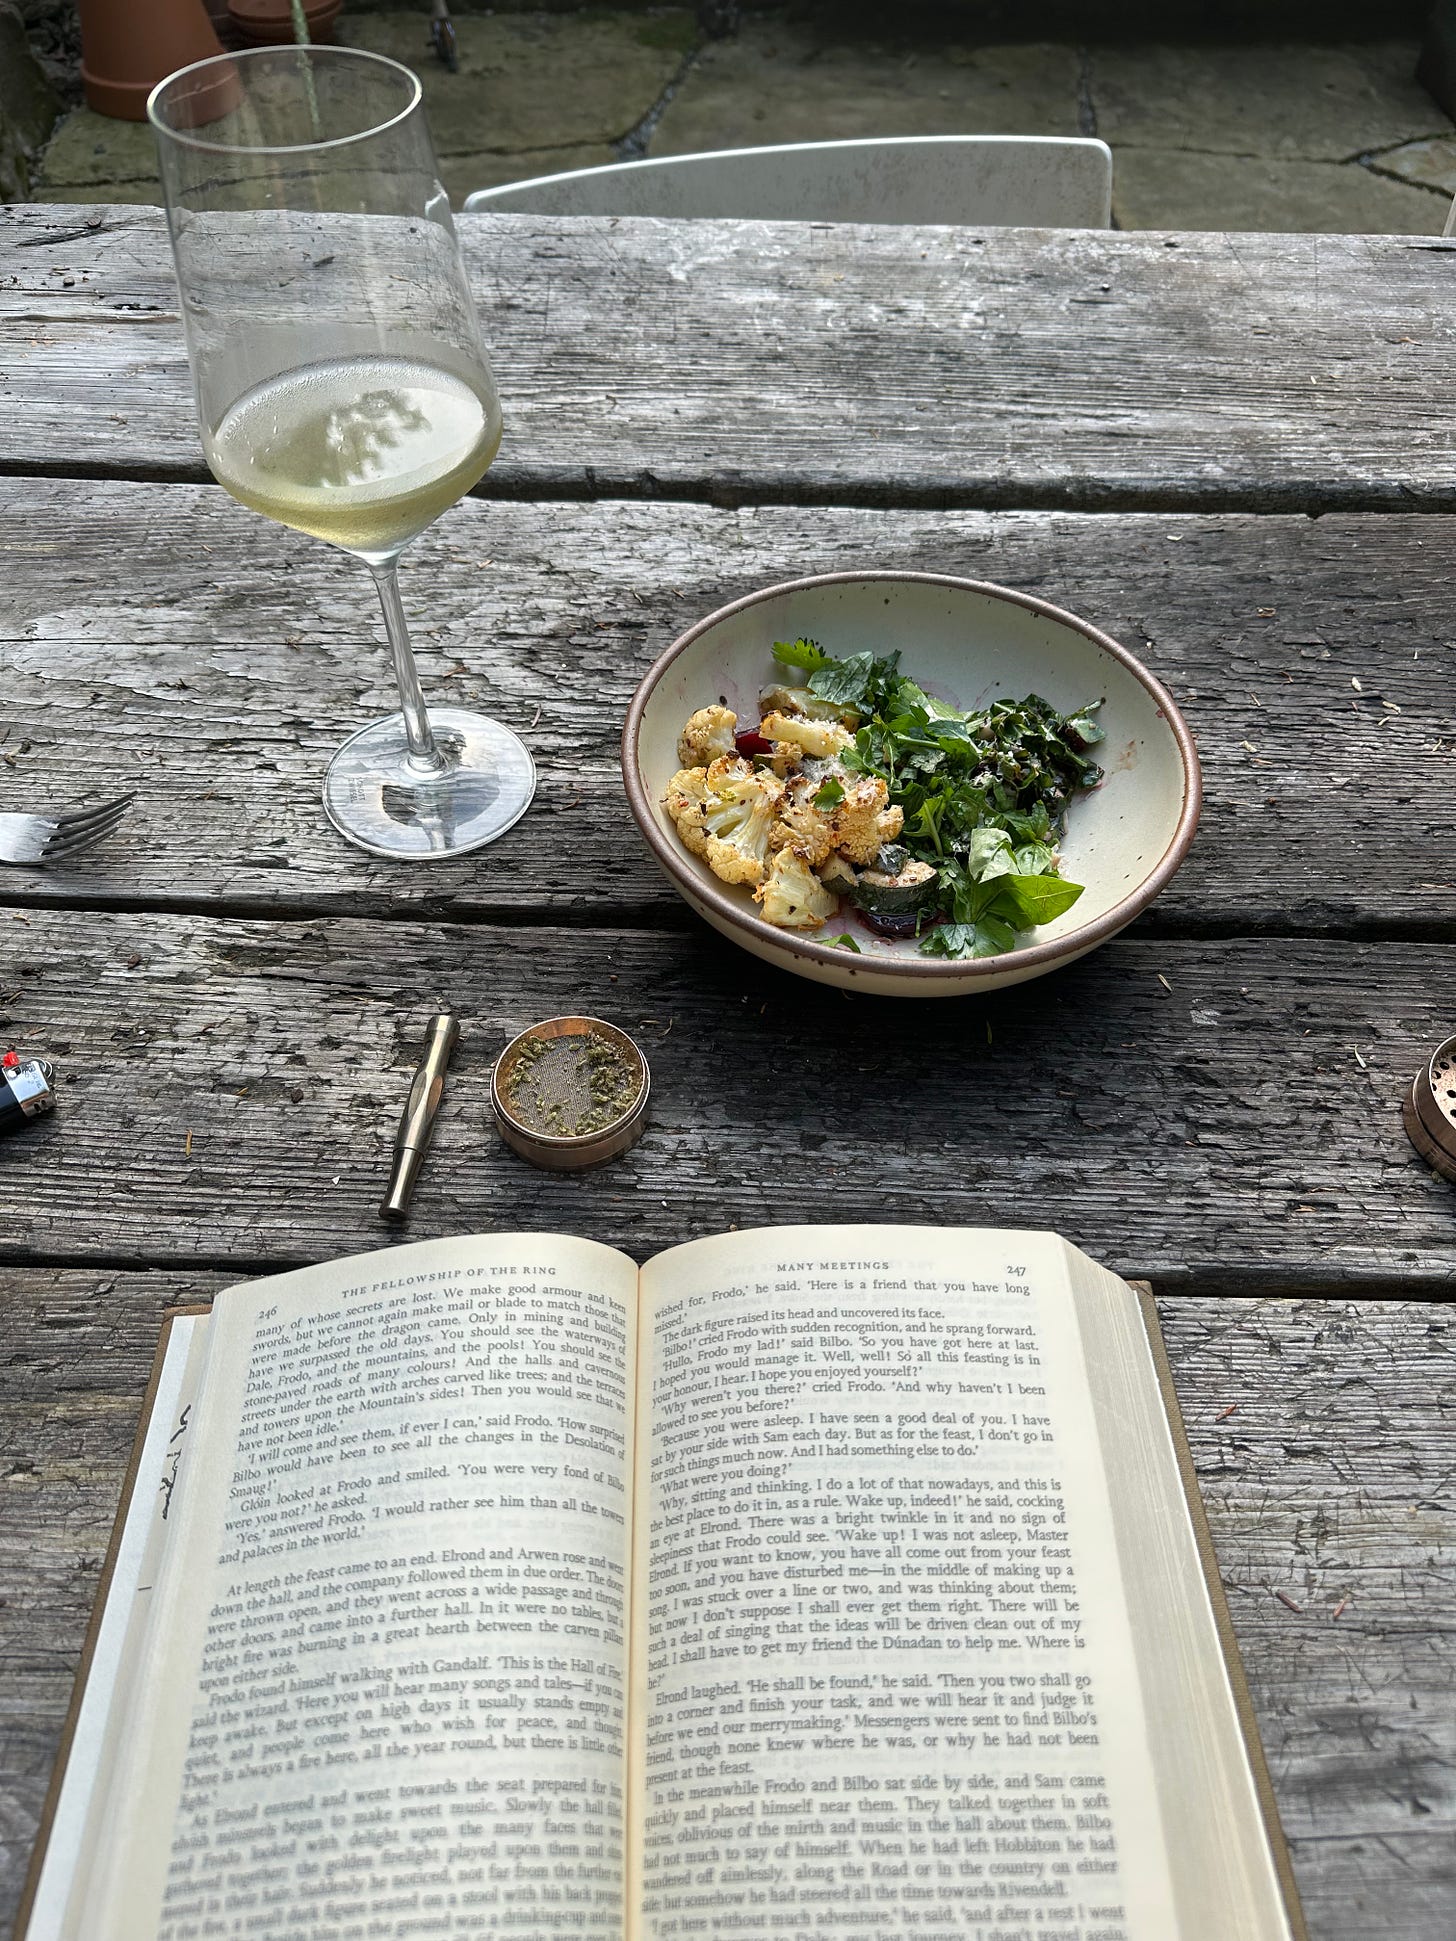 a glass of wine, a bowl full of vegetables, a one-hitter with weed, and Tolkien's Lord of the Rings opened up to the chapter called Many Meetings